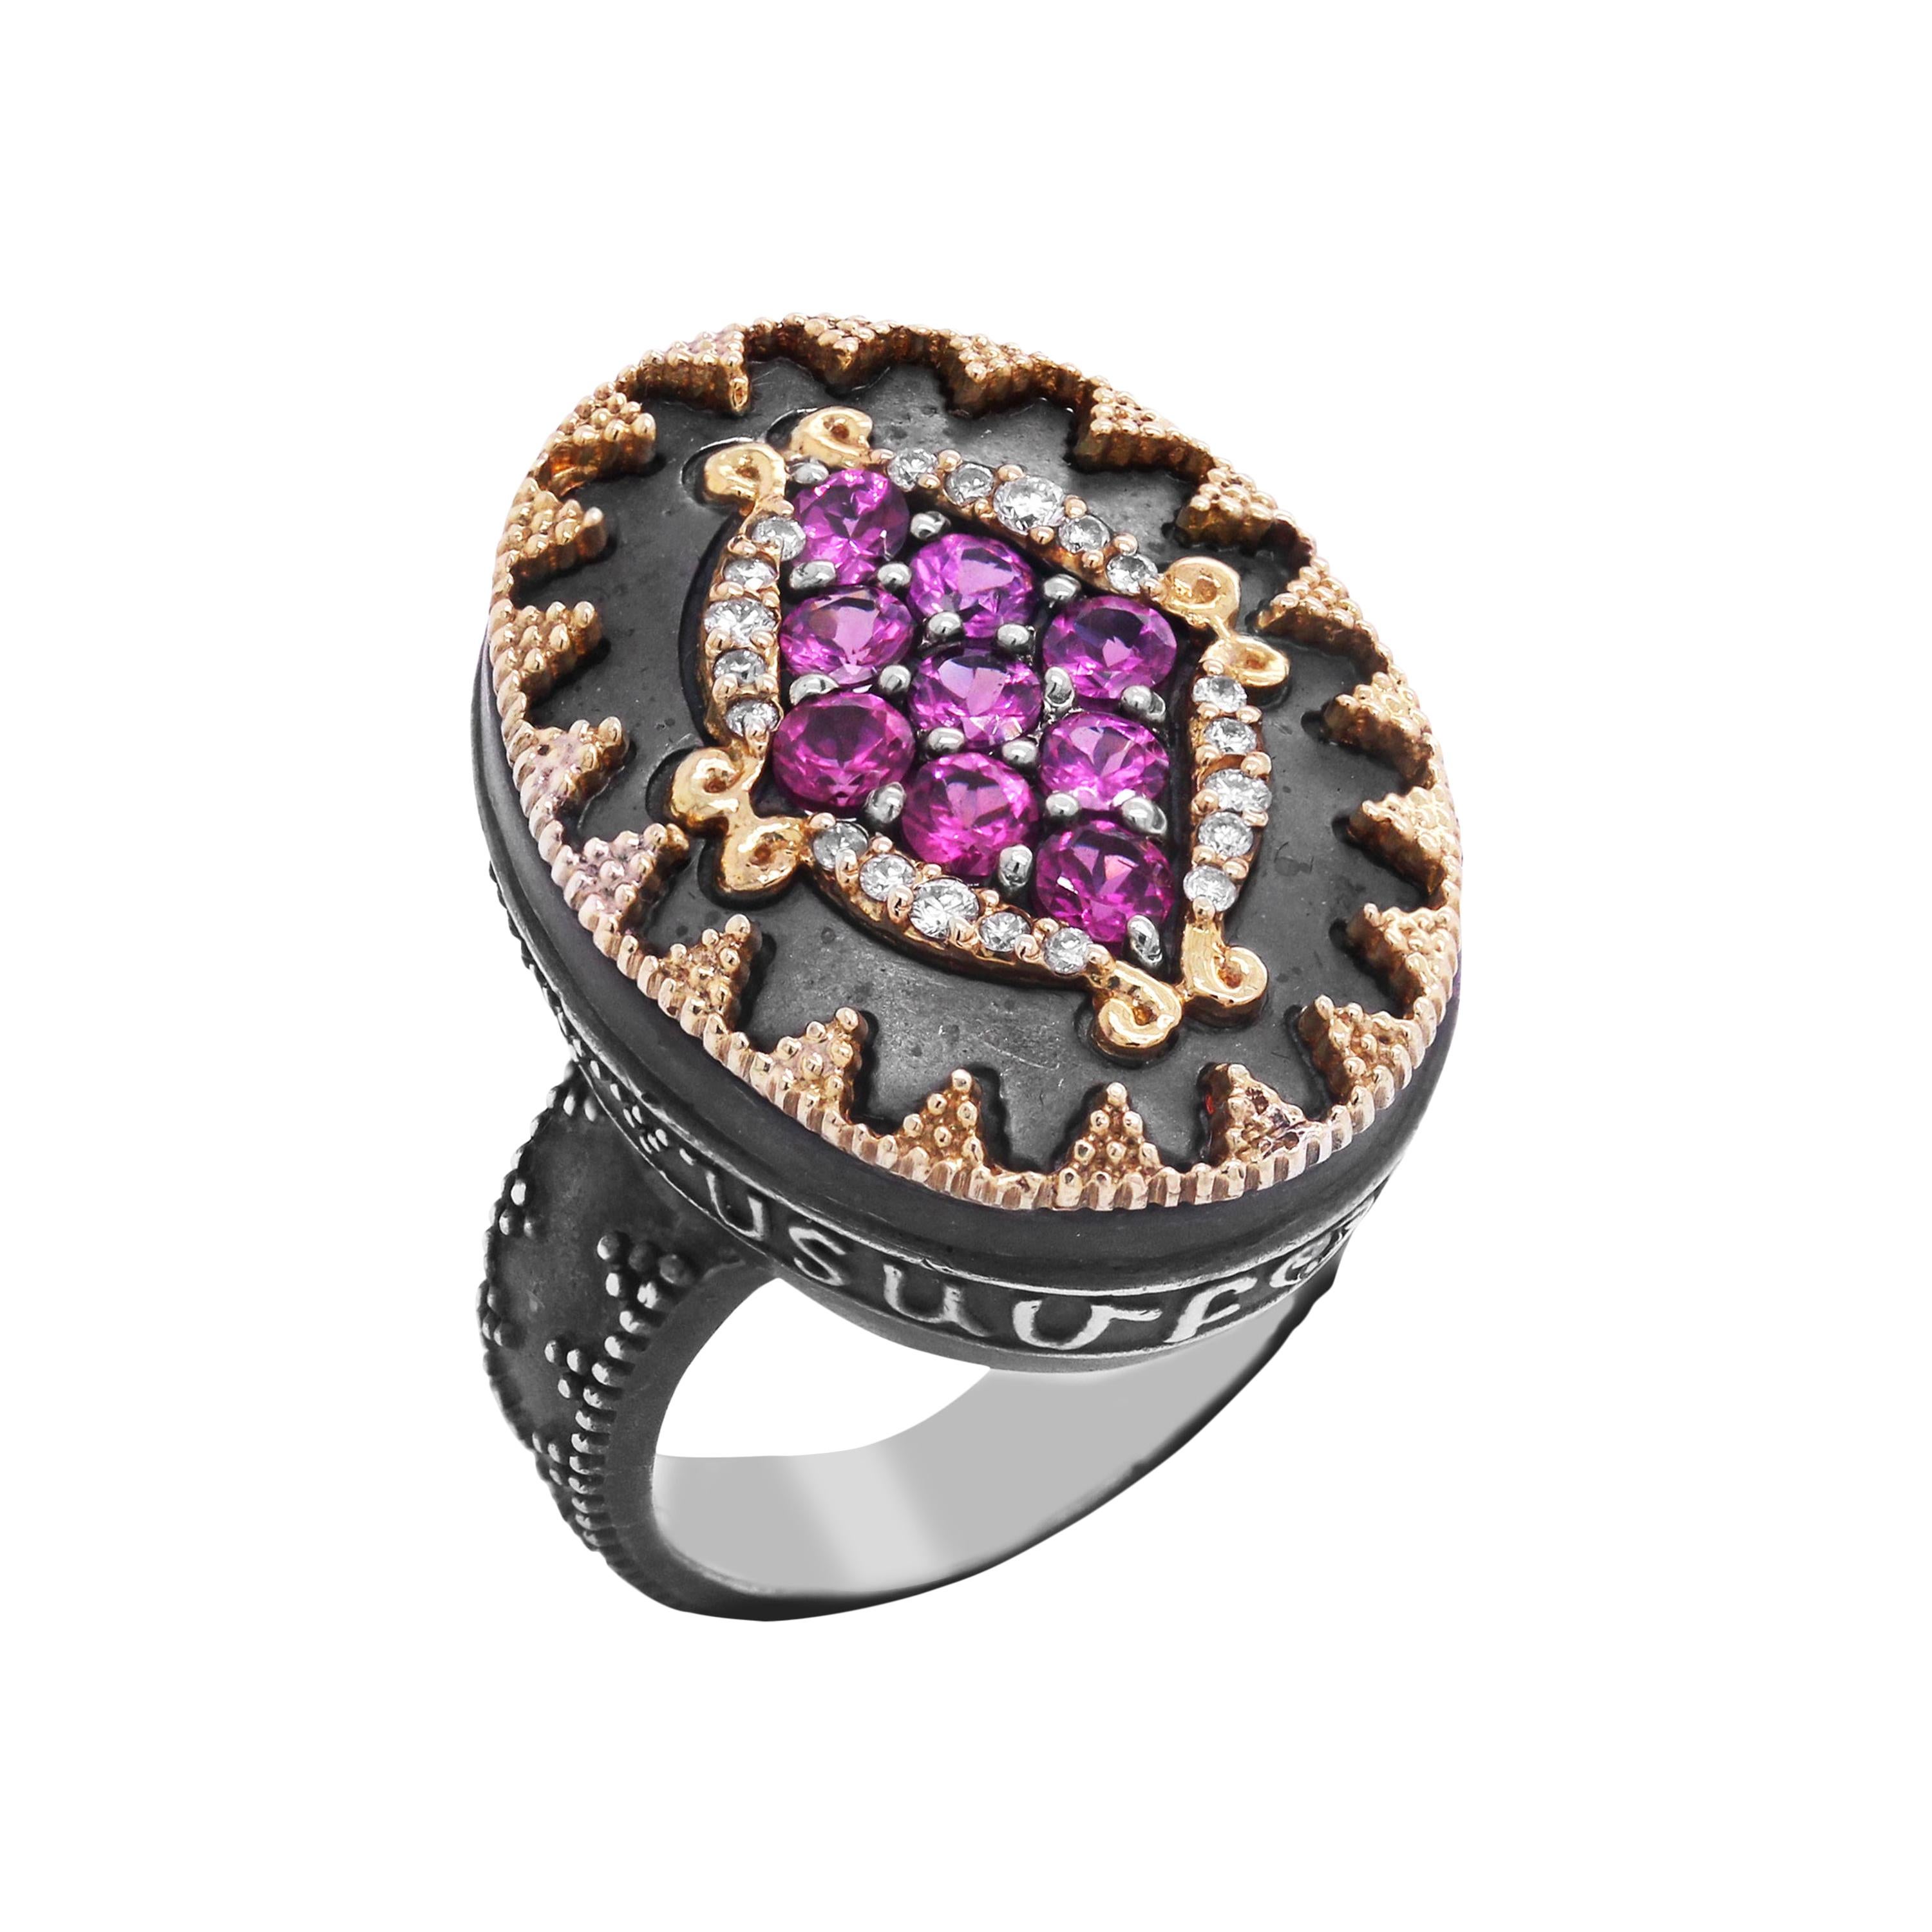 Darkened Silver and 18K Gold Oval Dome Ring with Magenta Garnet and Diamonds